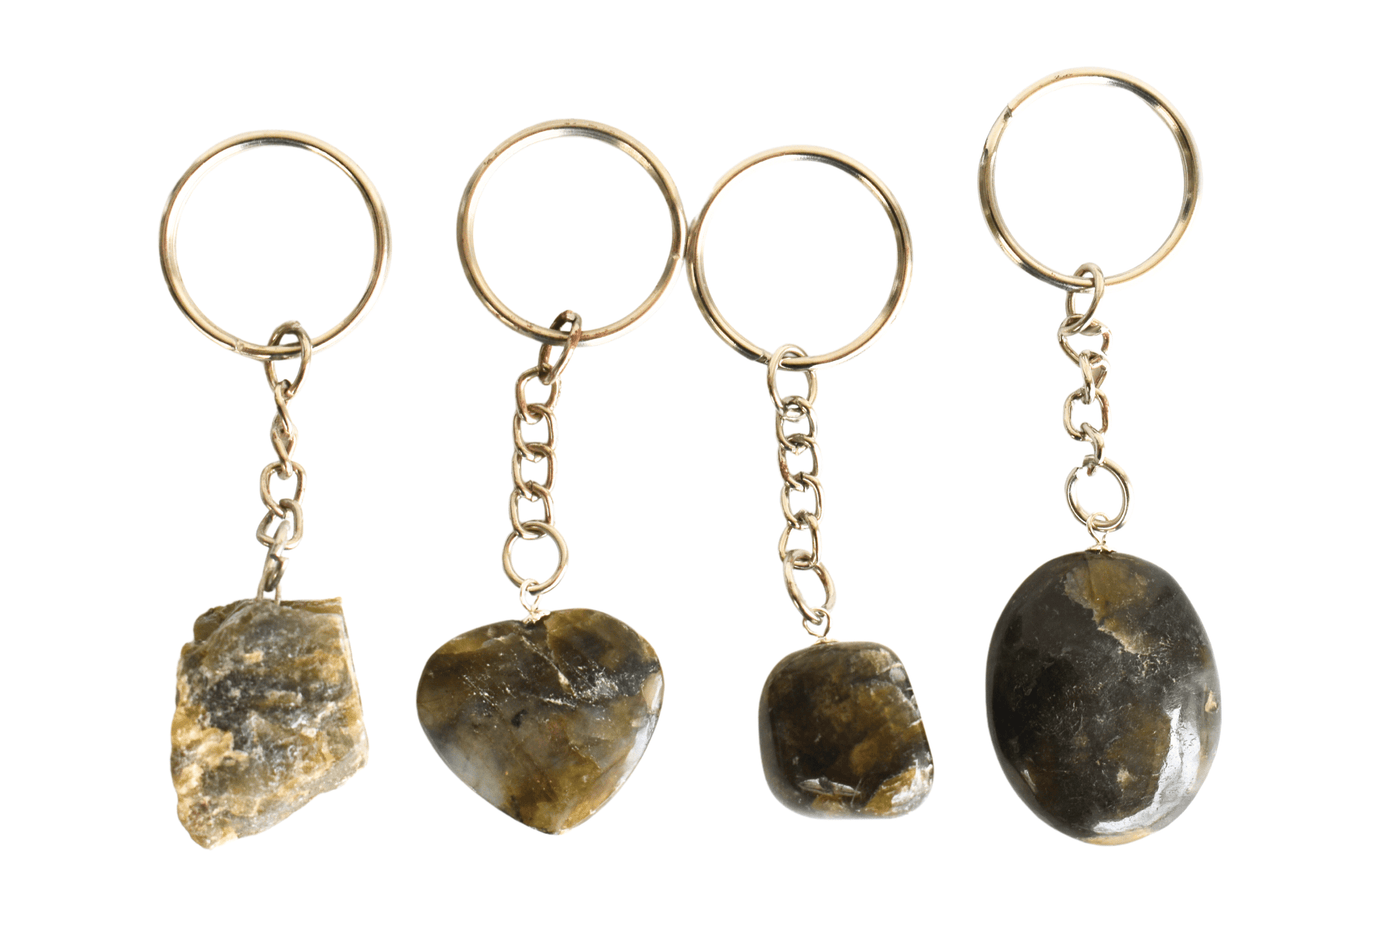 Labradorite Key Chain, Gemstone Keychain Crystal Key Ring (Expanded Awareness and Intuition)